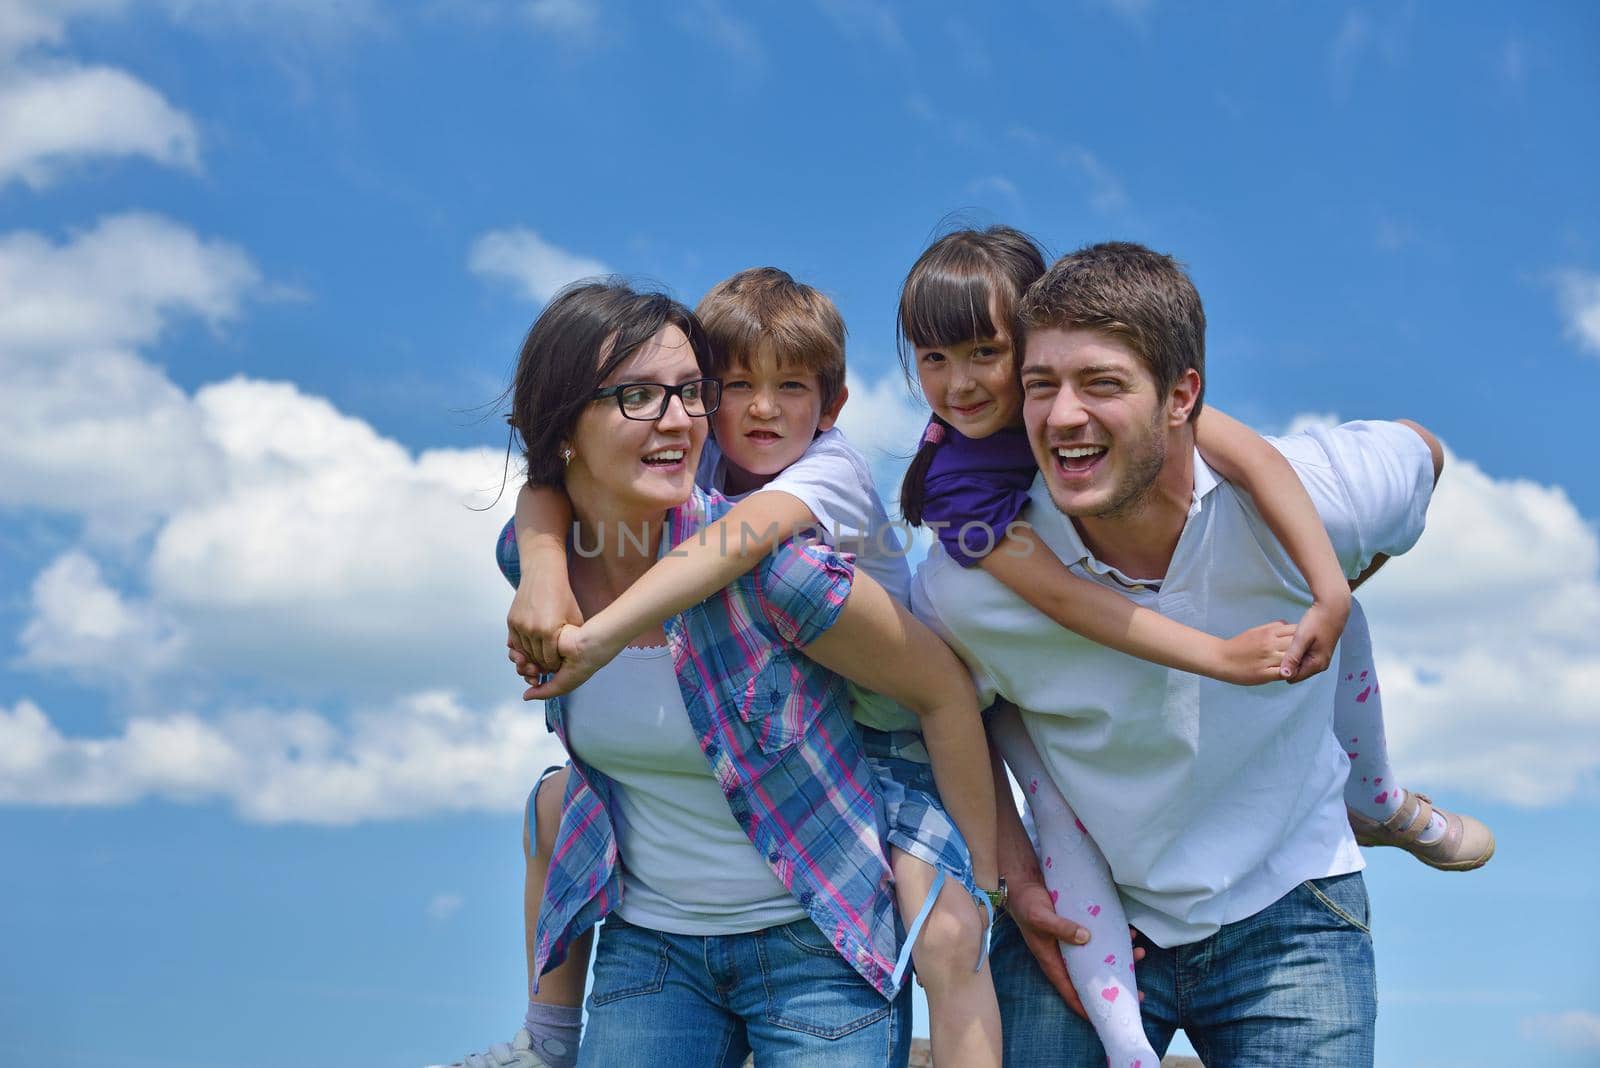 happy young family with their kids have fun and relax outdoors in nature with blue sky in background